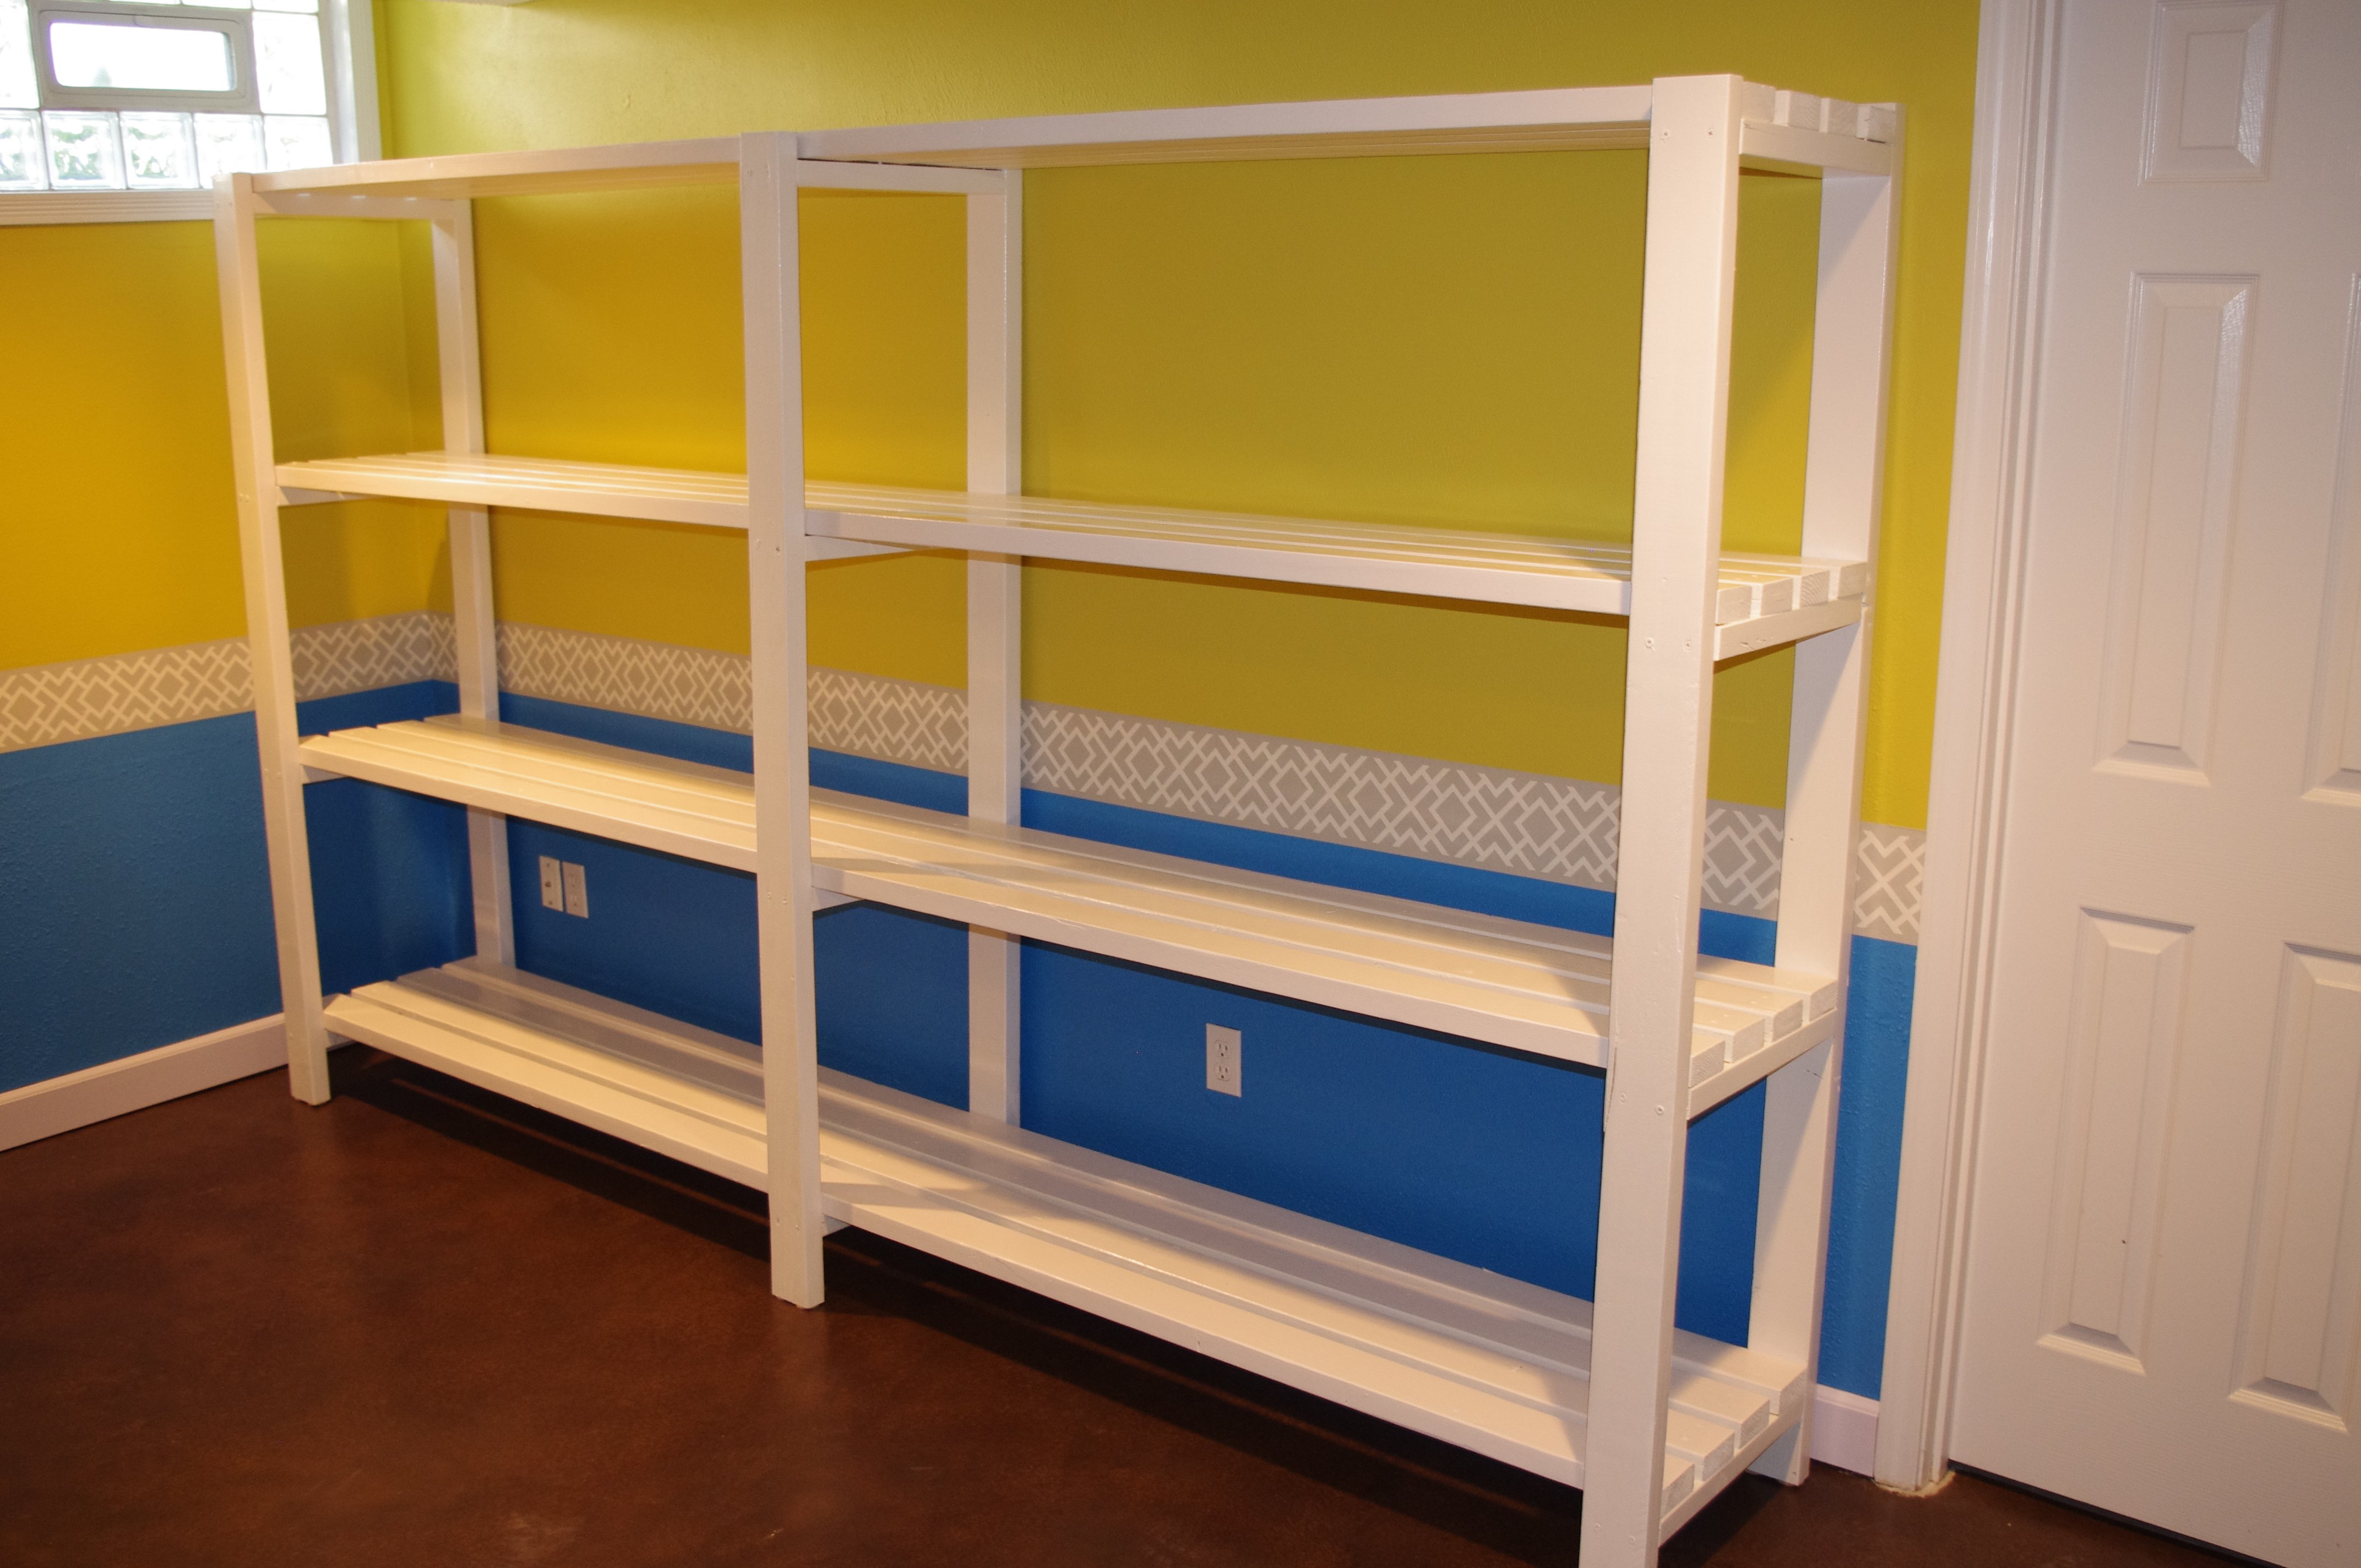 Easy, Economical Garage Shelving from 2x4s | Ana White